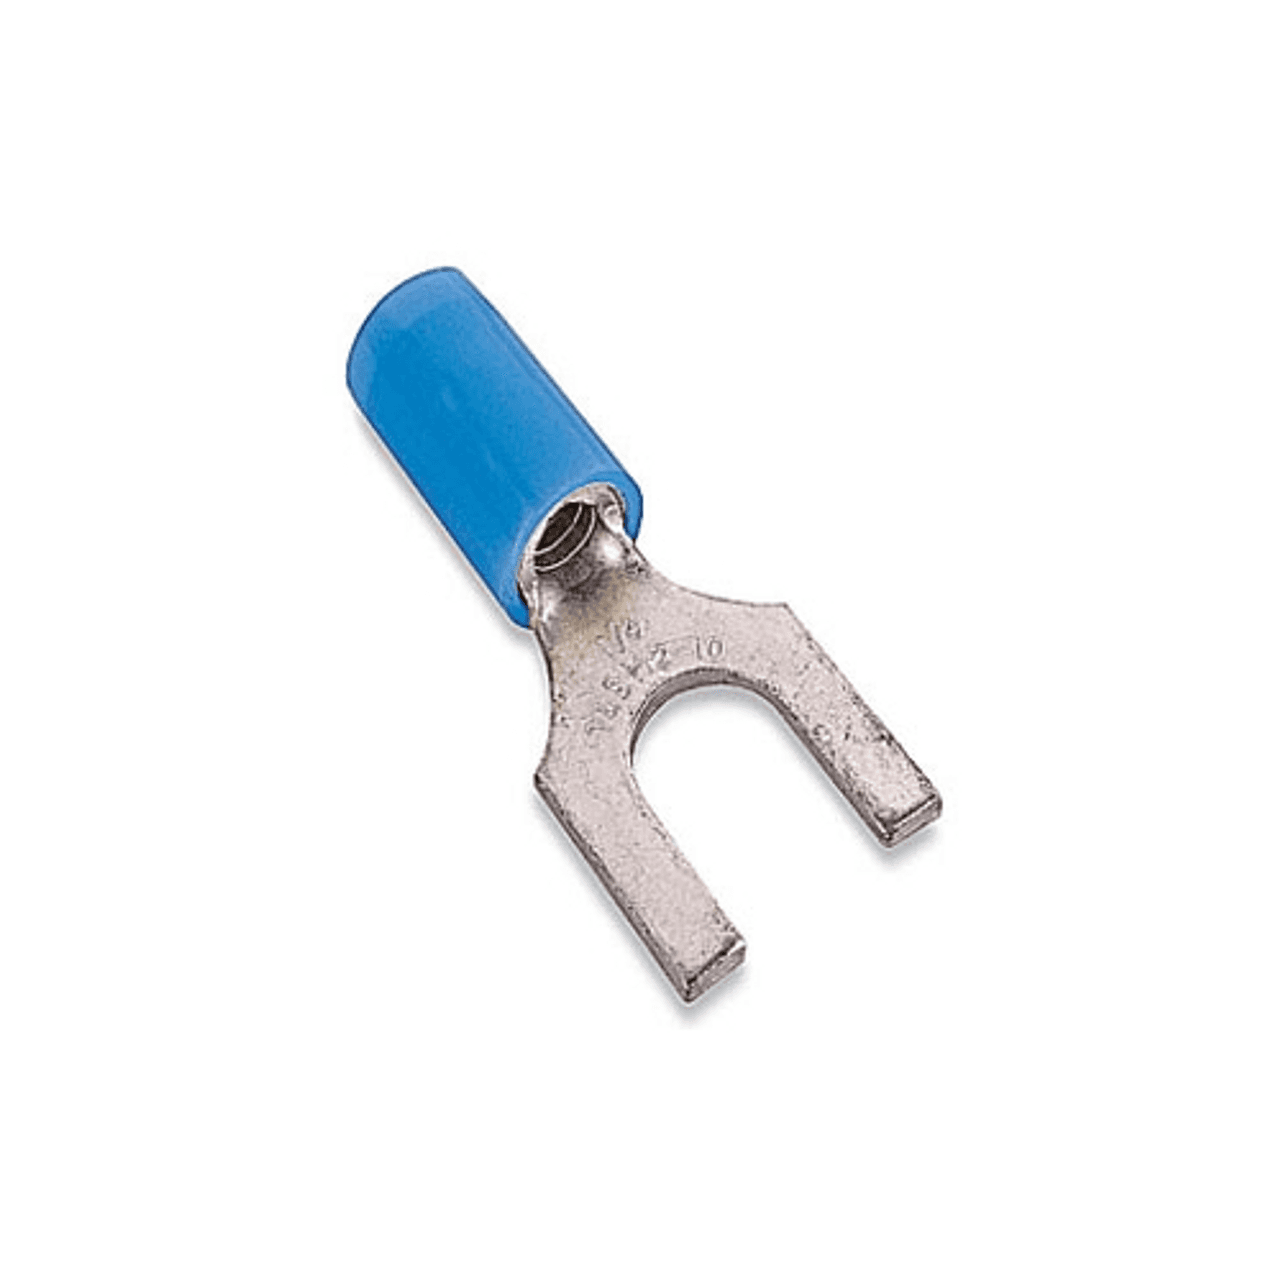 Thomas & Betts RB14-14F 18 to 14 AWG, 1/4" Stud, 600 V, Blue, Electrolytic Tin Plated Copper, Nylon Insulated, Serrated Brazed Seam Barrel, Electrical